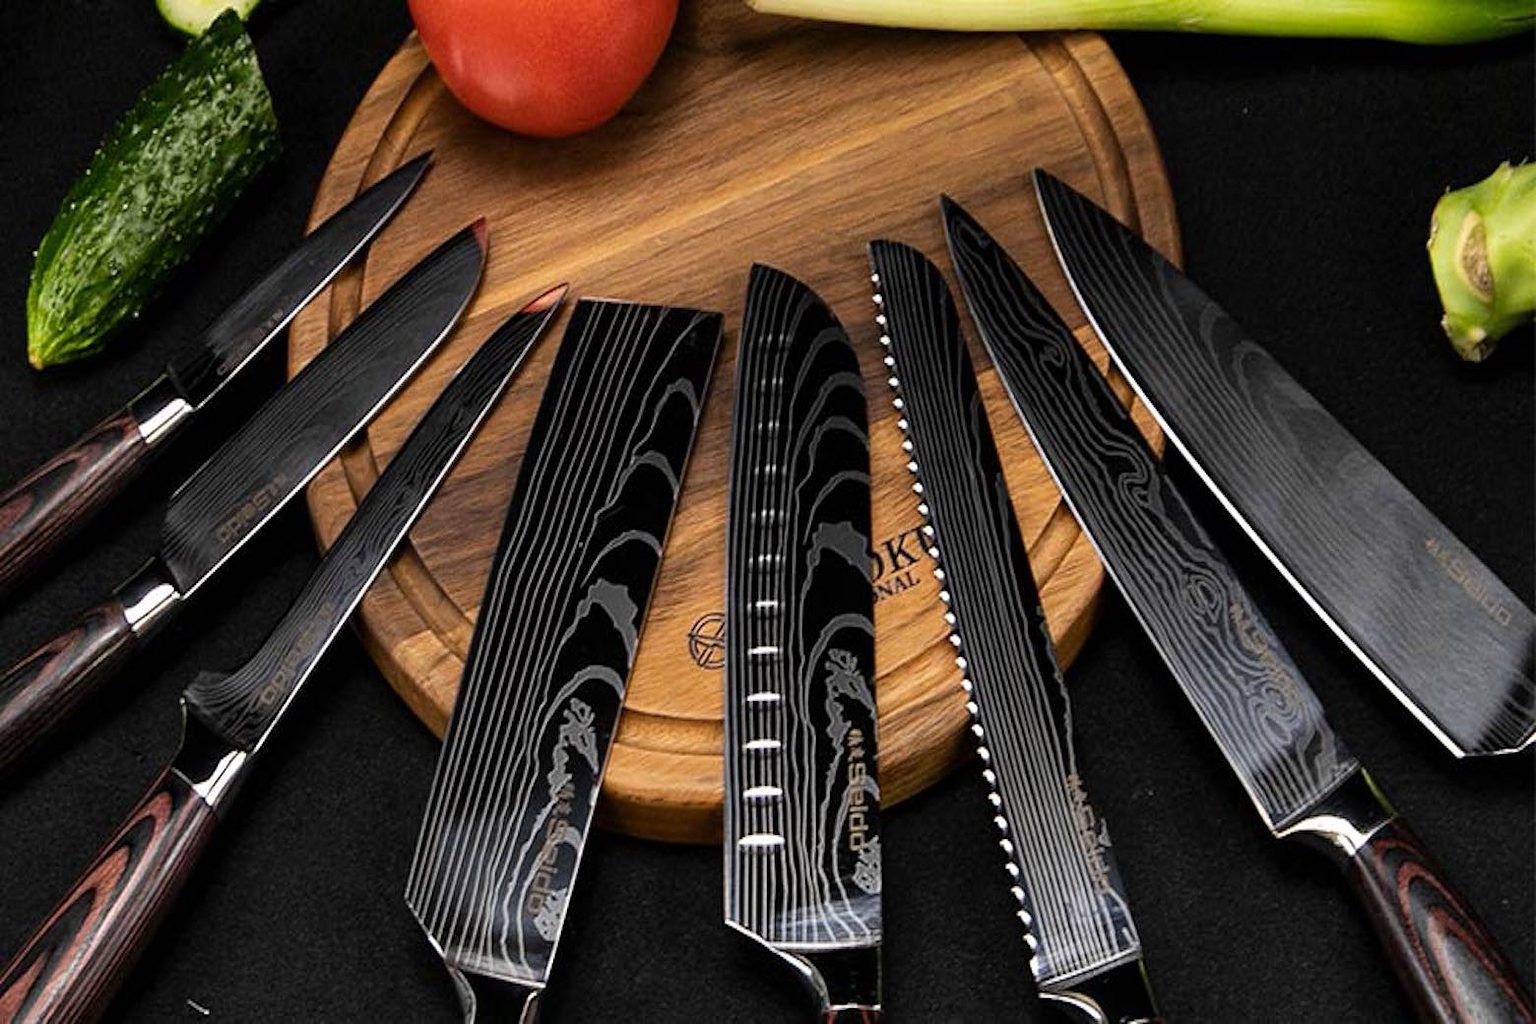 Take up cooking in 2023 with this top-of-the-range Japanese knife set, at $79 today.